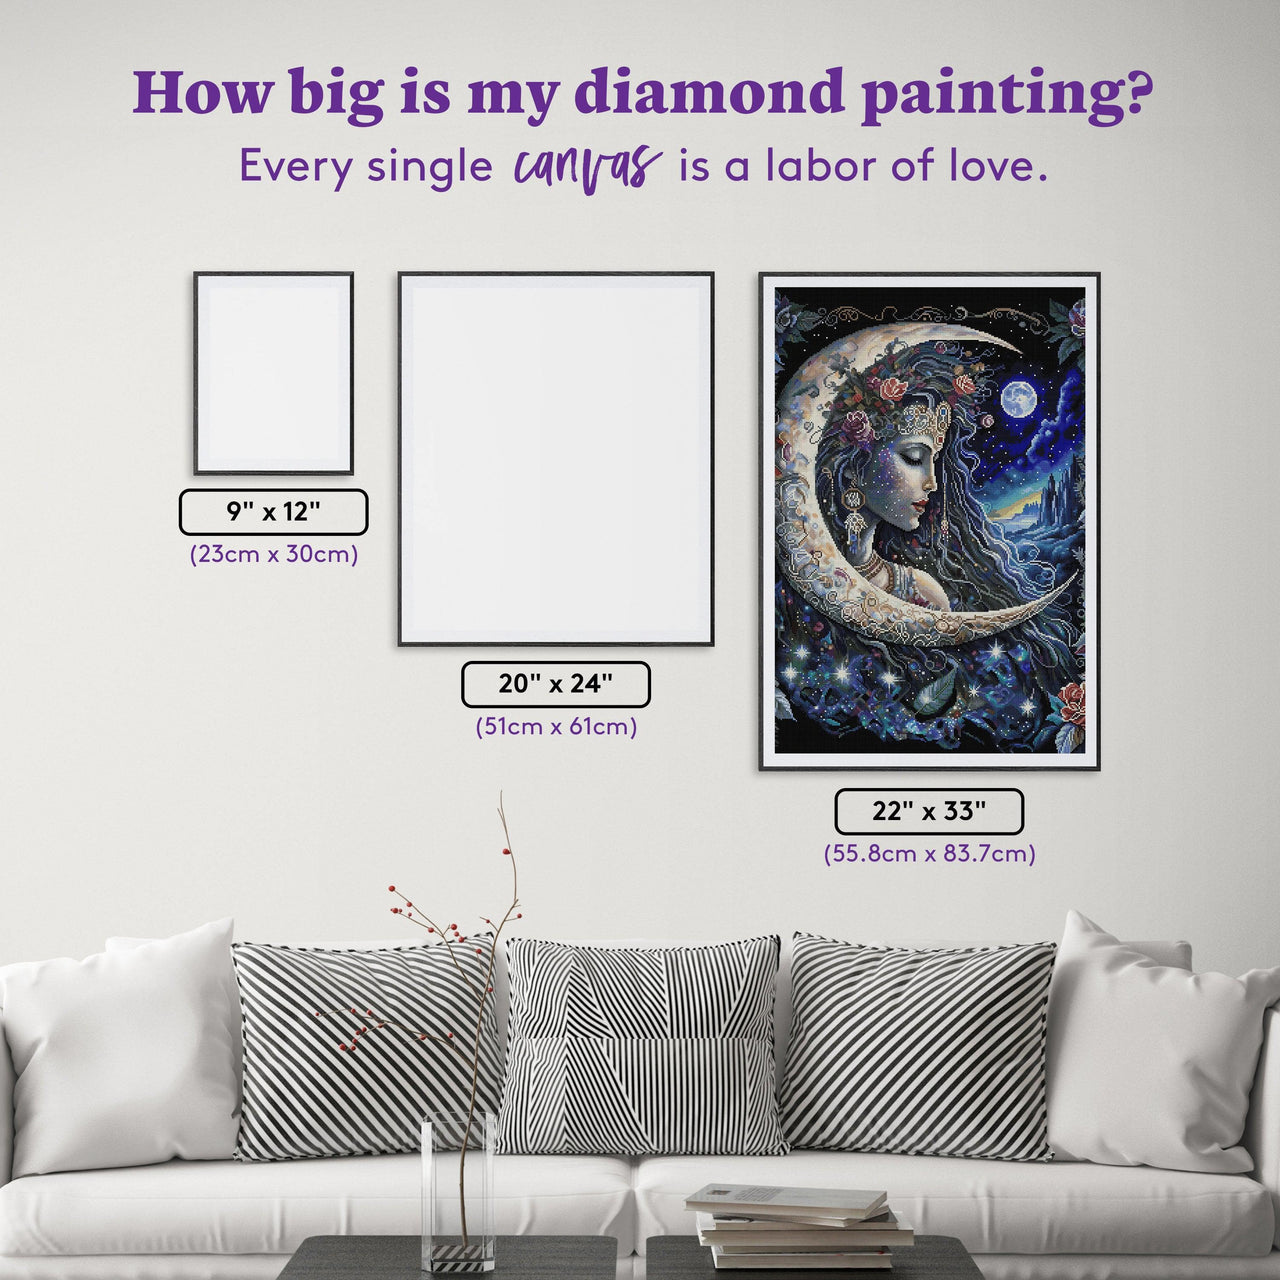 Diamond Painting Moon Goddess 22" x 33" (55.8cm x 83.7cm) / Square with 68 Colors including 4 ABs and 1 Fairy Dust Diamonds / 75,264